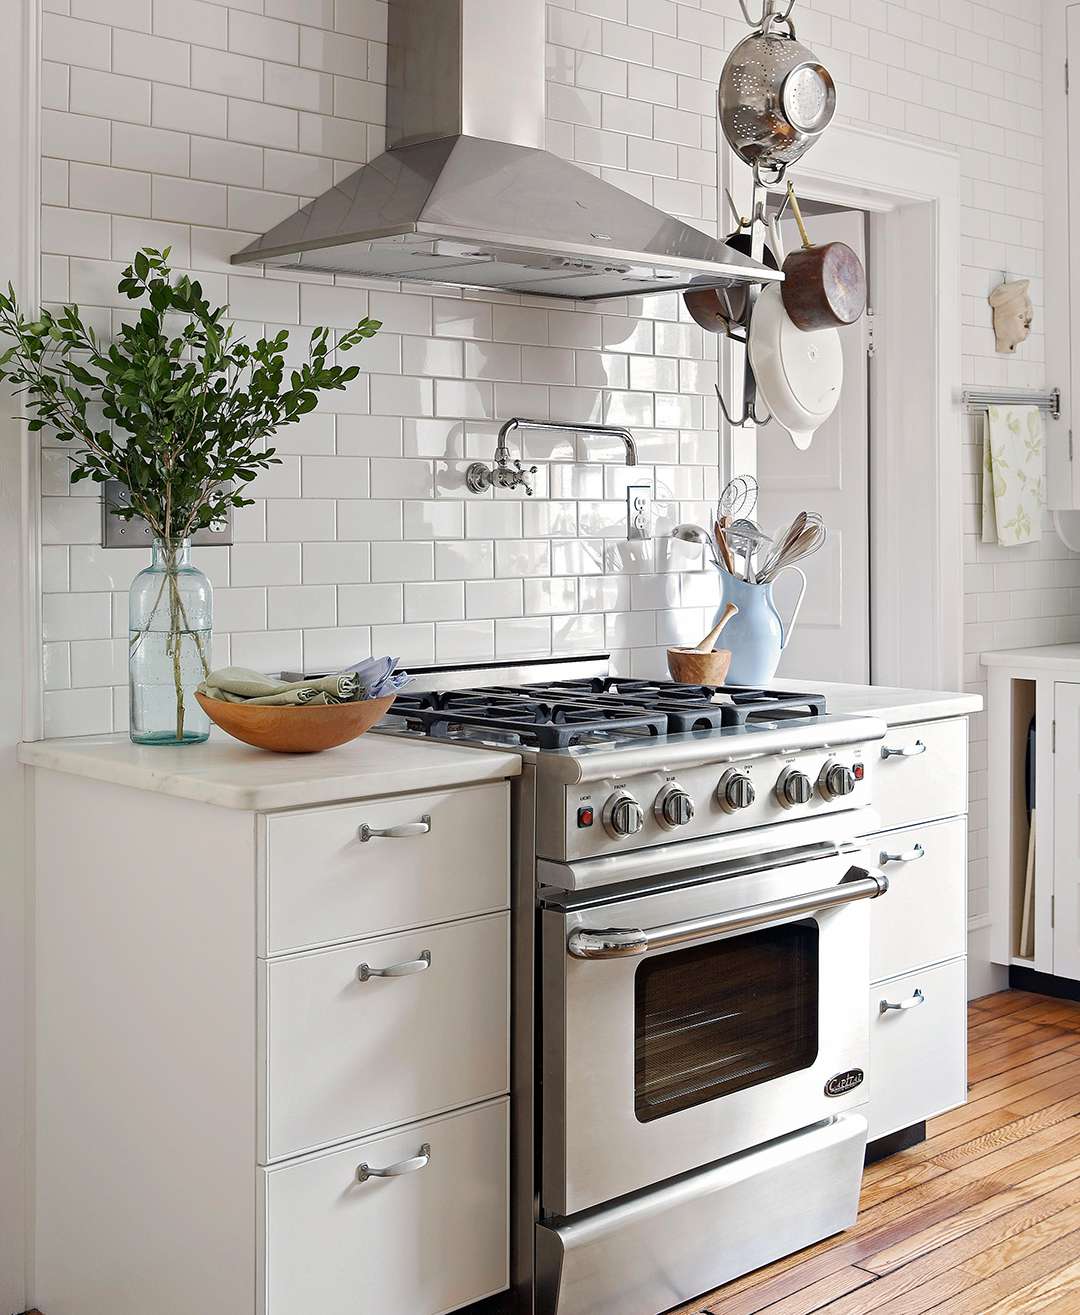 white kitchen stove oven range with hanging pots